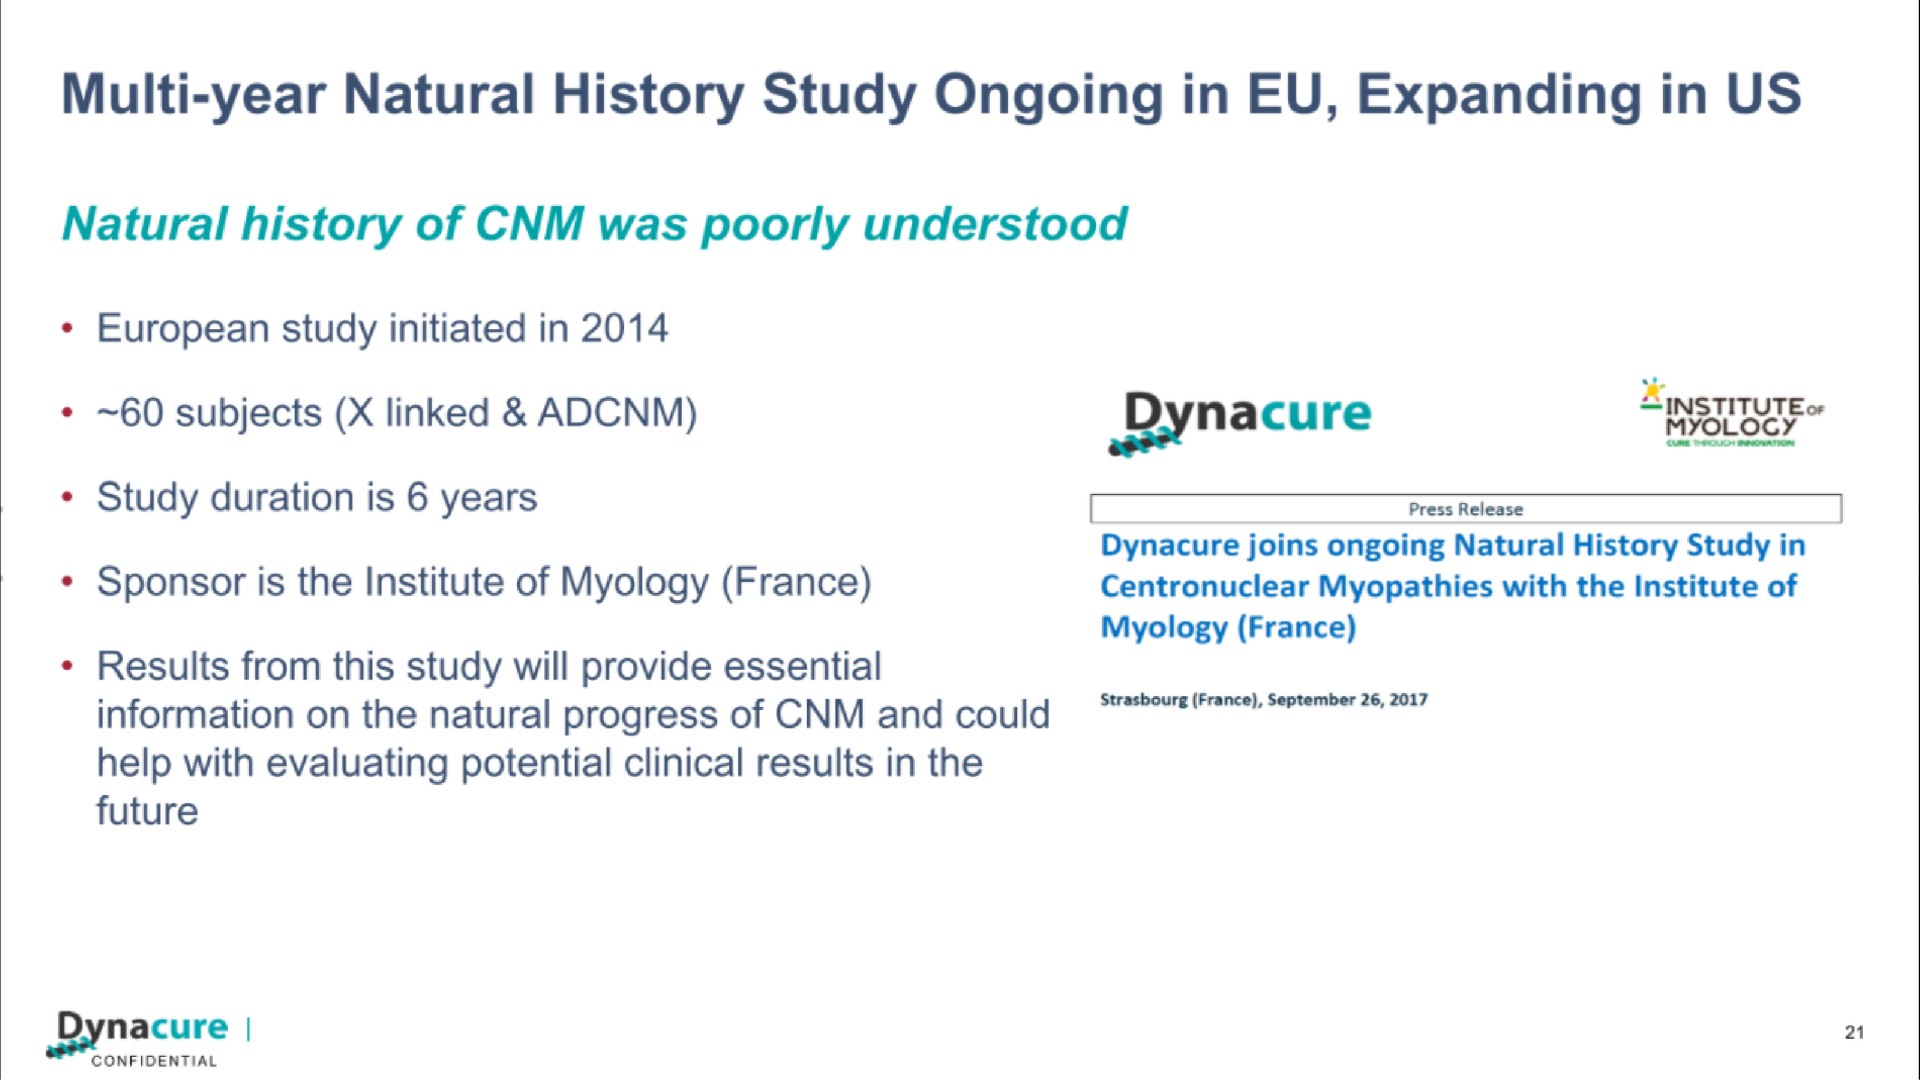 year natural history study ongoing in expanding in us | Dynacure